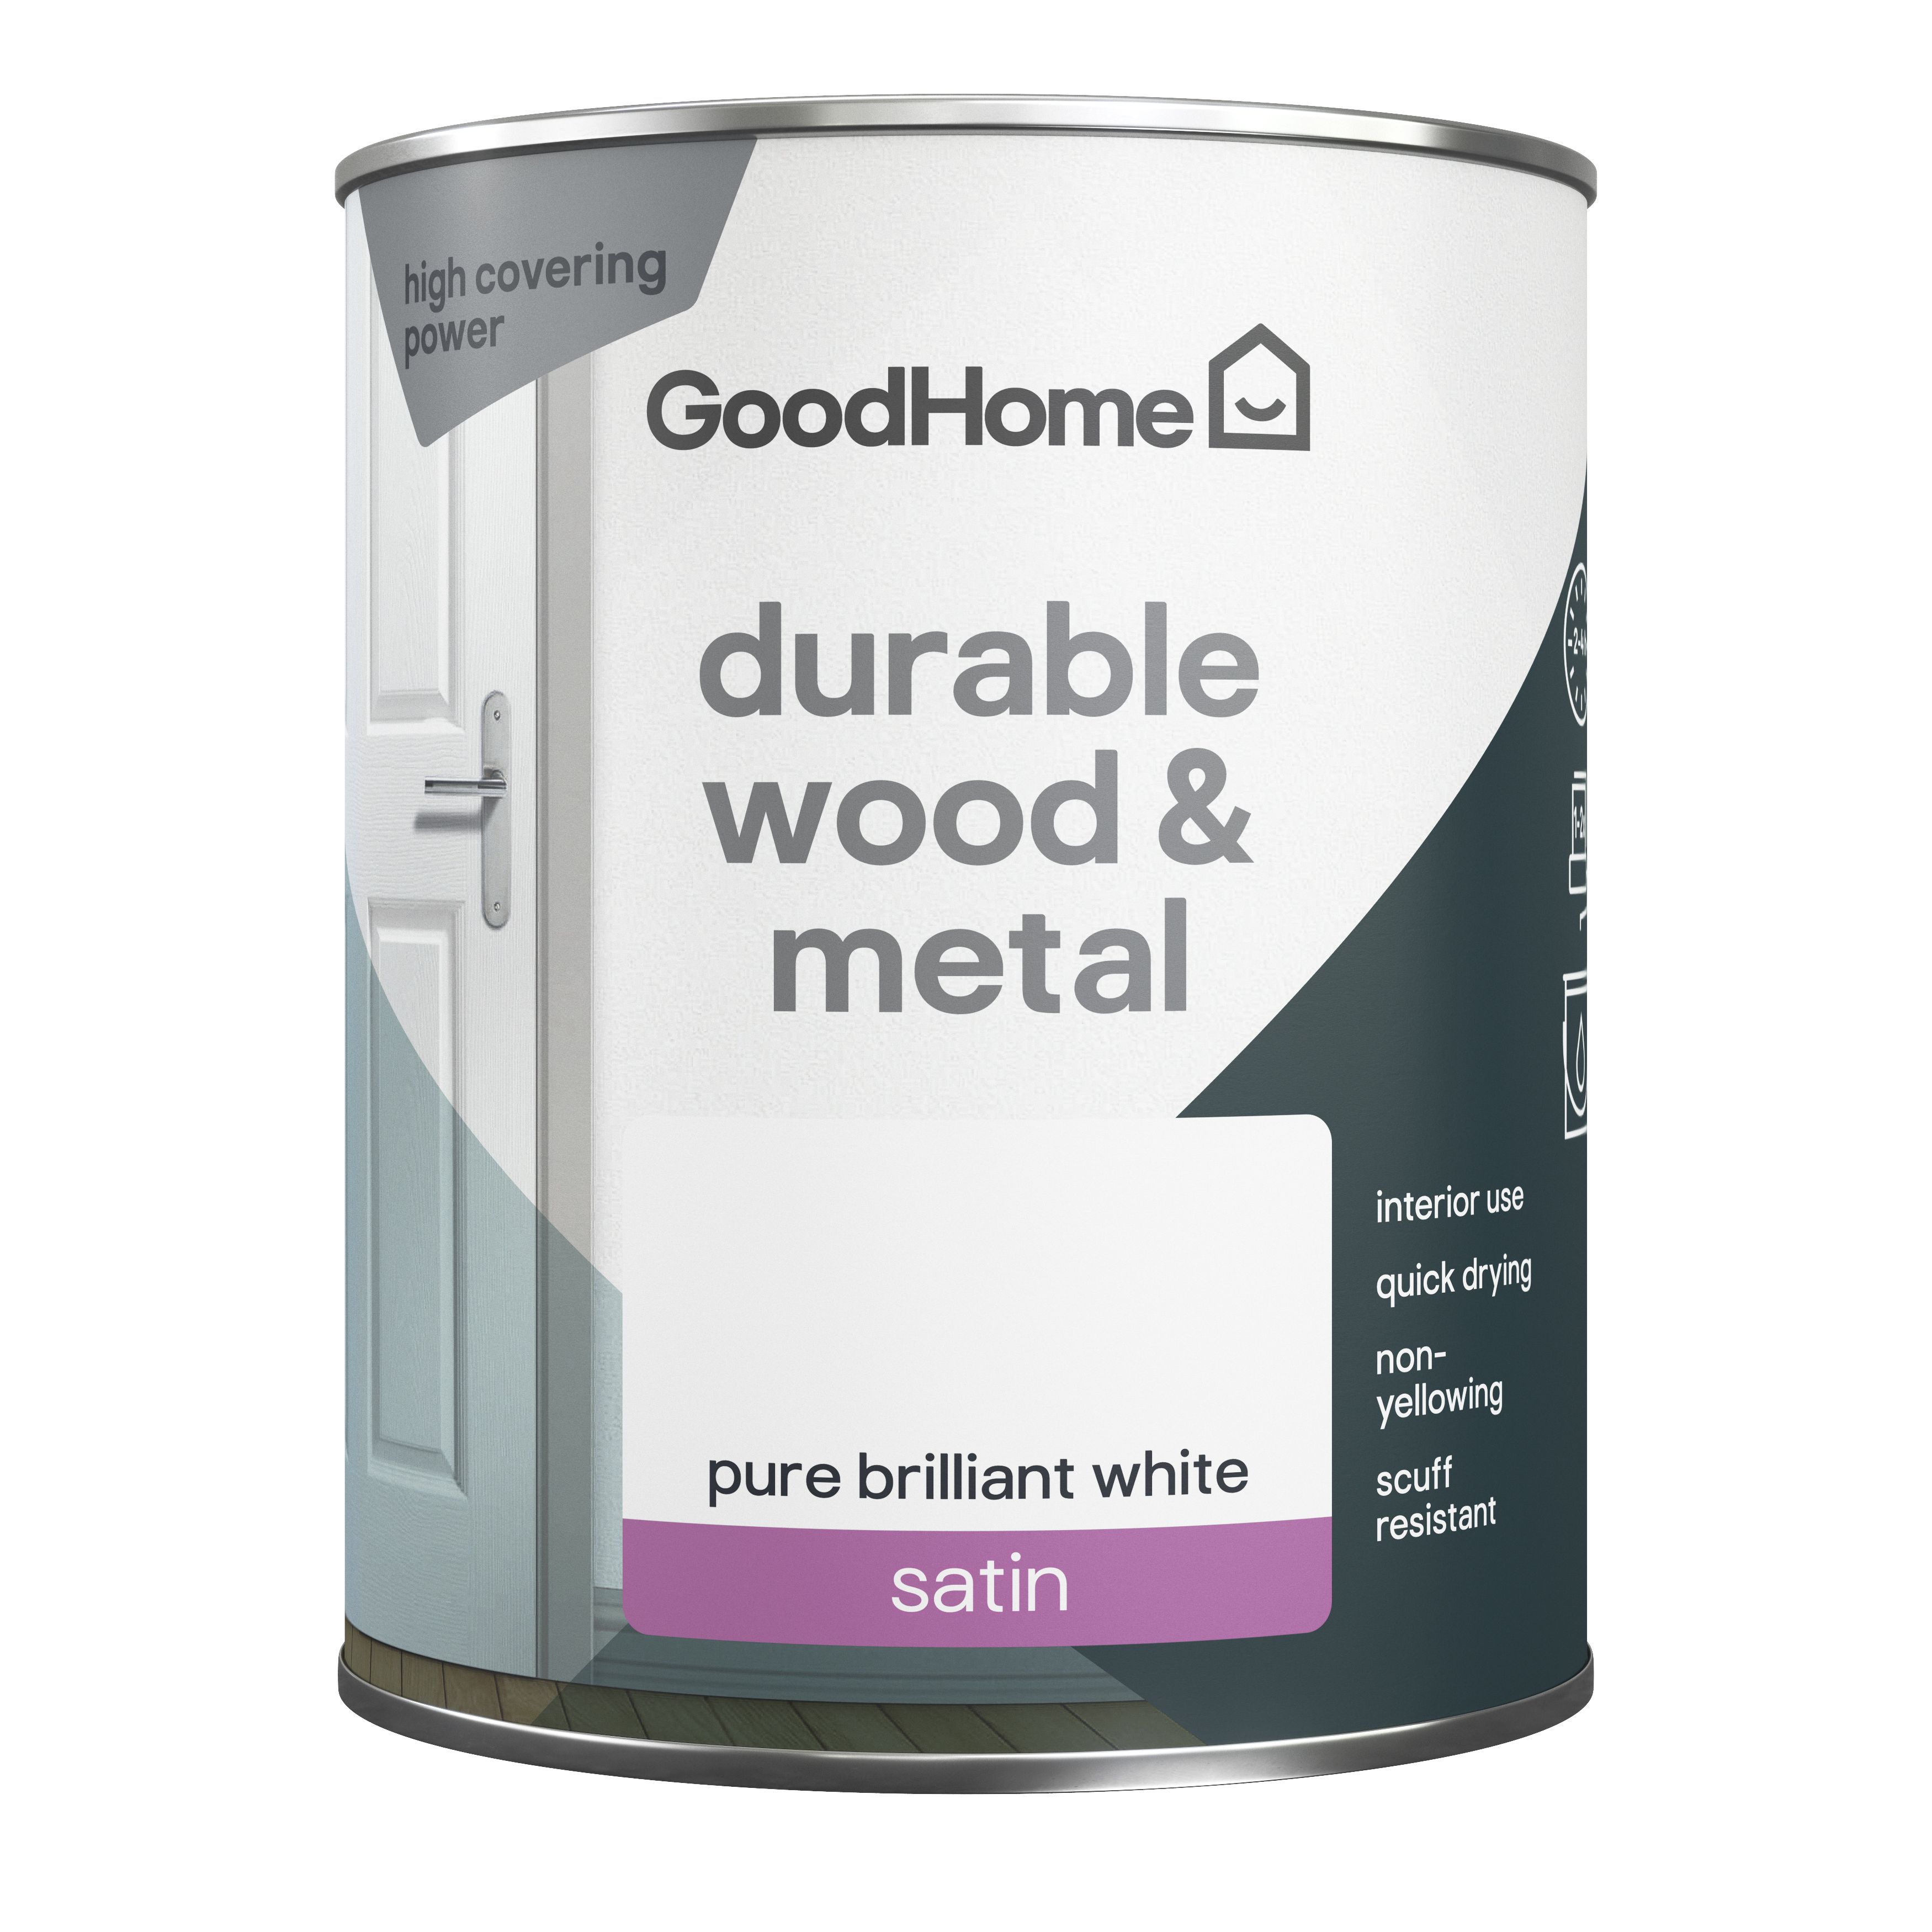 GoodHome Durable Pure Brilliant White Satinwood Metal & wood paint, 750ml